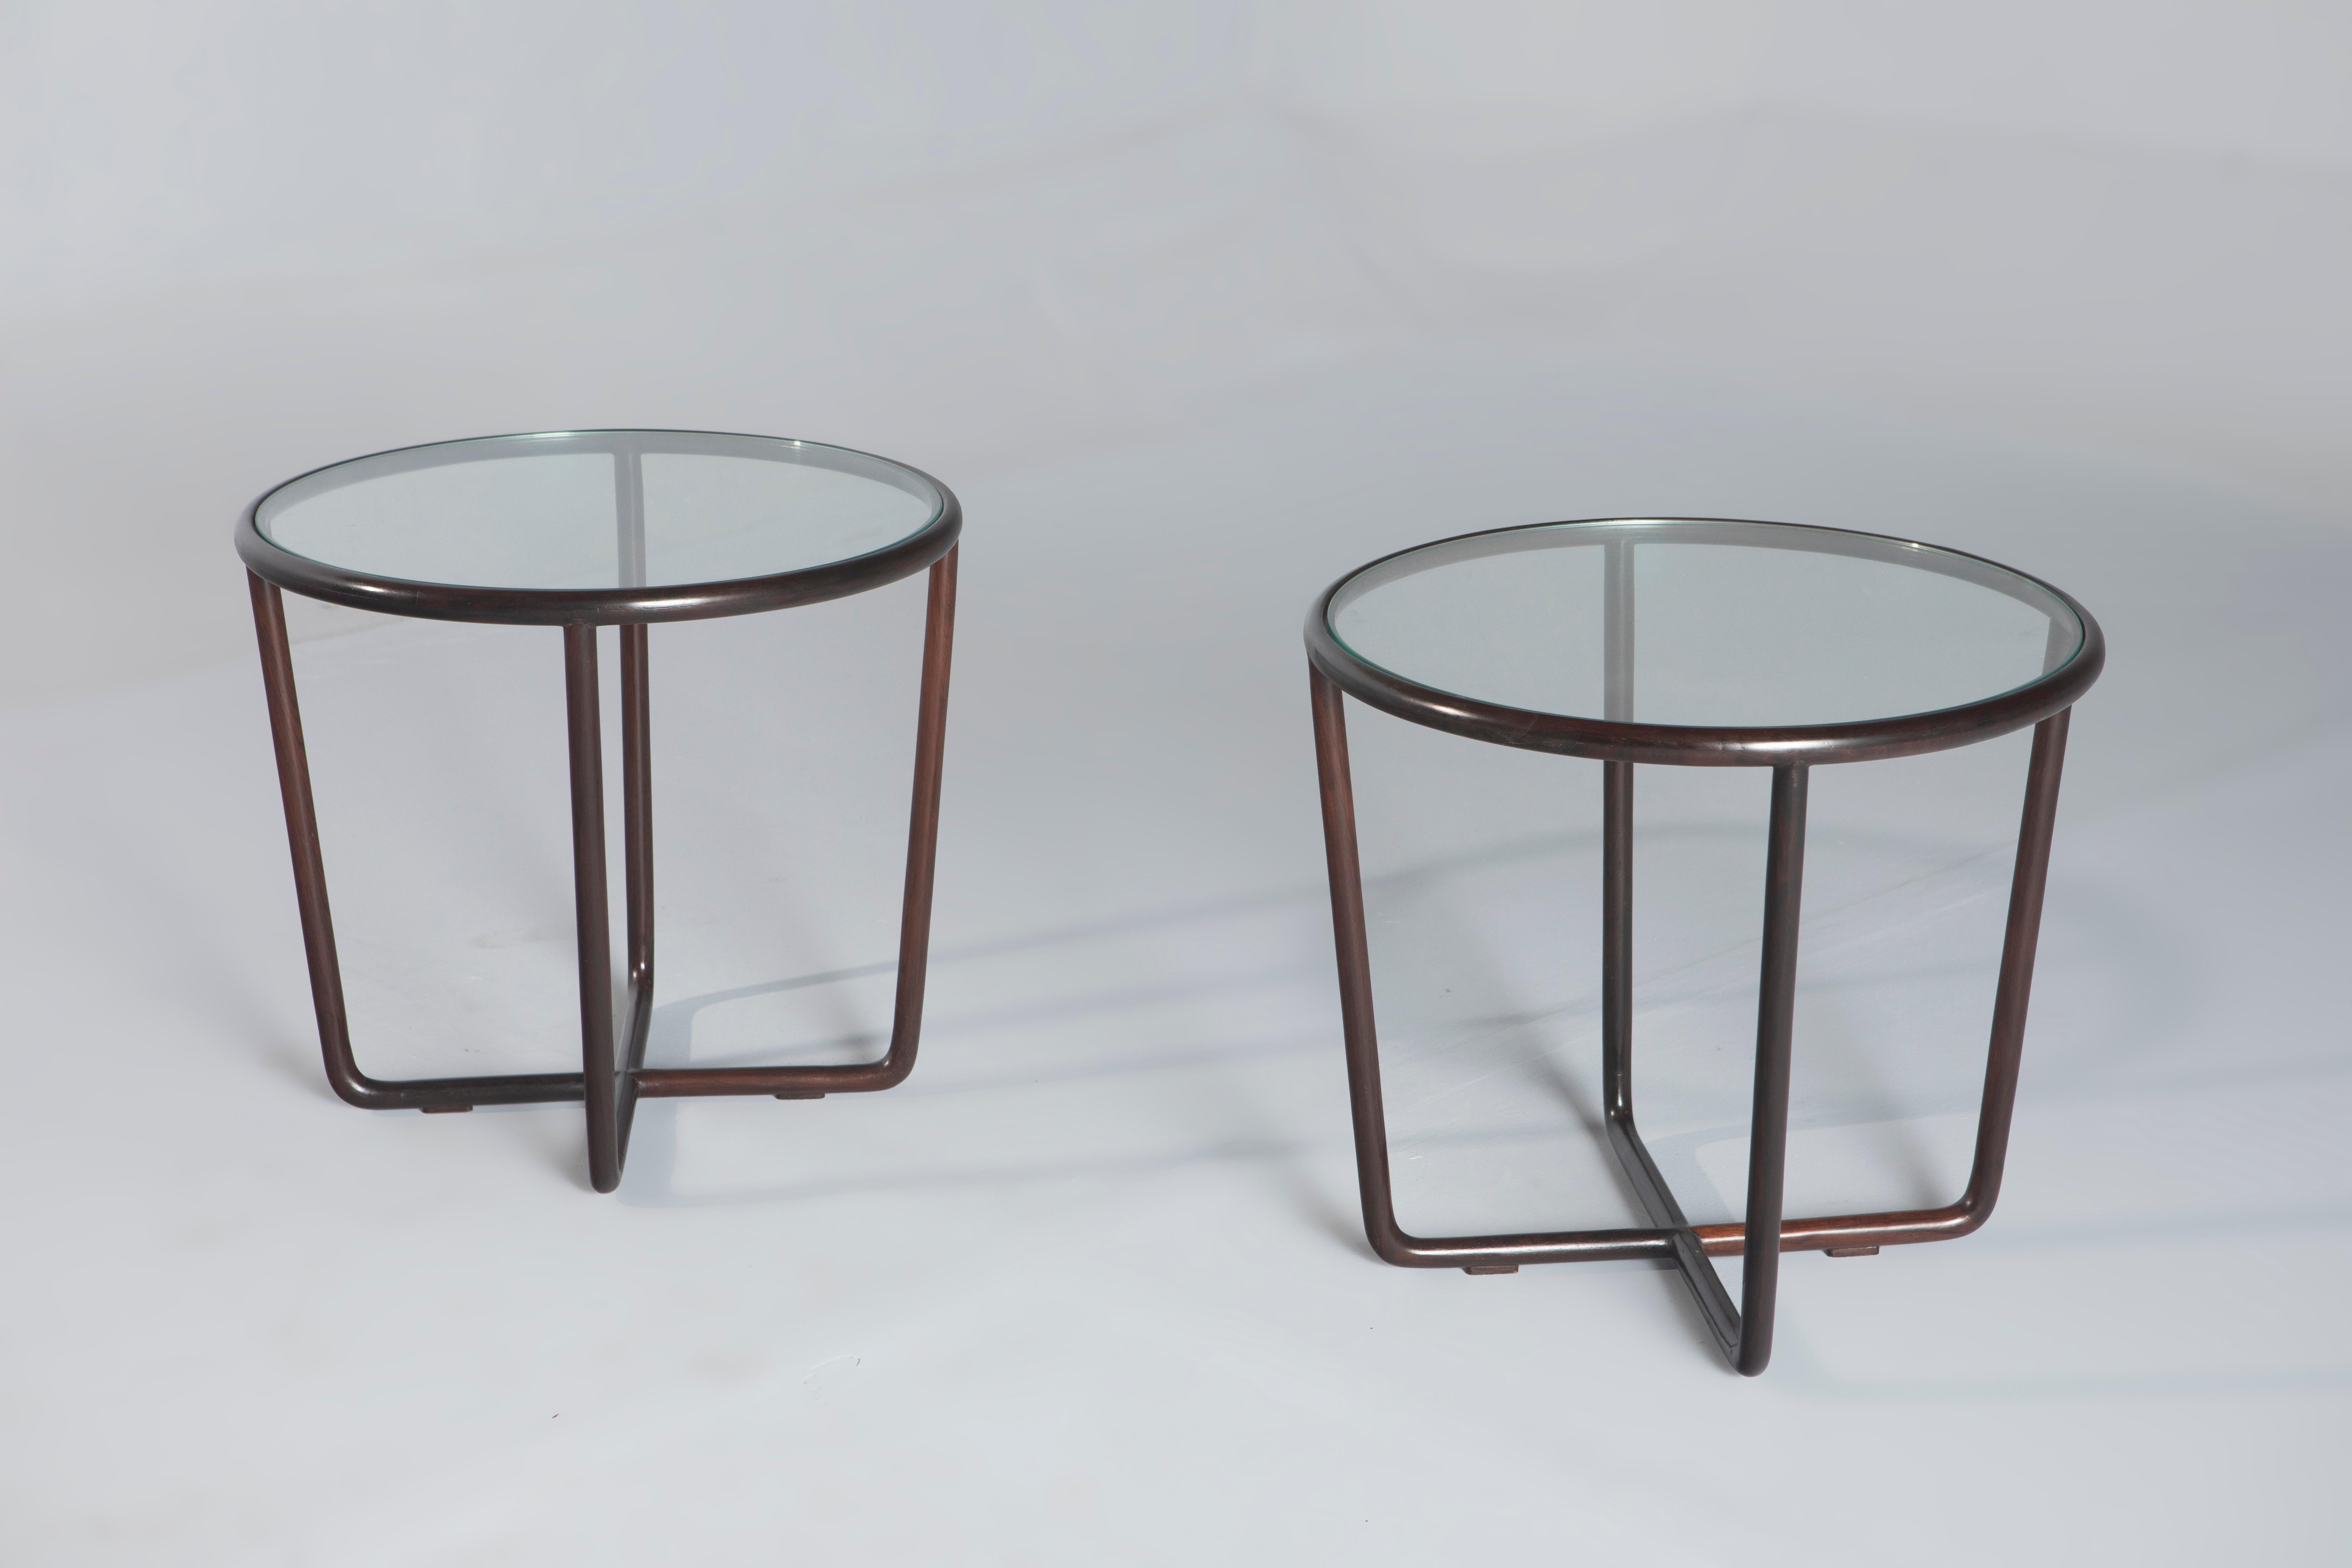 Pair of Mid-Century Modern side tables by Joaquim Tenreiro, Brazil, 1960s

The pair of side tables by Joaquim Tenreiro is a stunning example of the designer's signature style. Made from solid wood, these tables feature a beautiful and functional